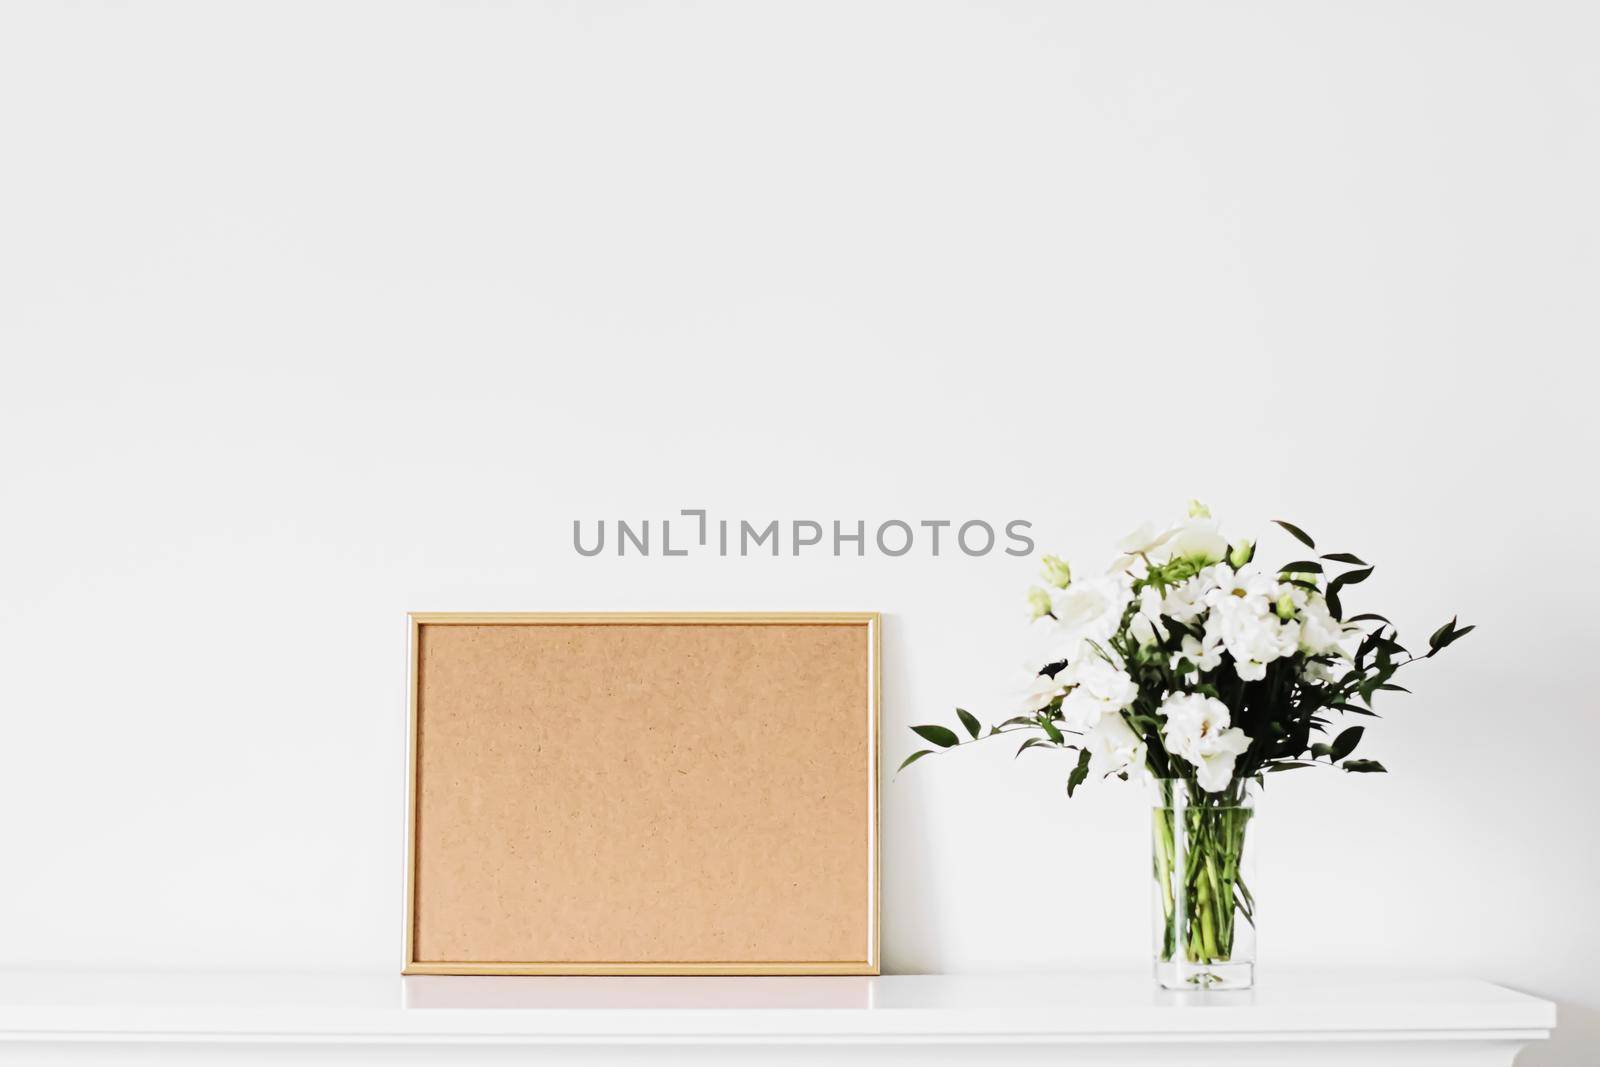 Golden horizontal frame and bouquet of fresh flowers on white furniture, luxury home decor and design for mockup creation by Anneleven